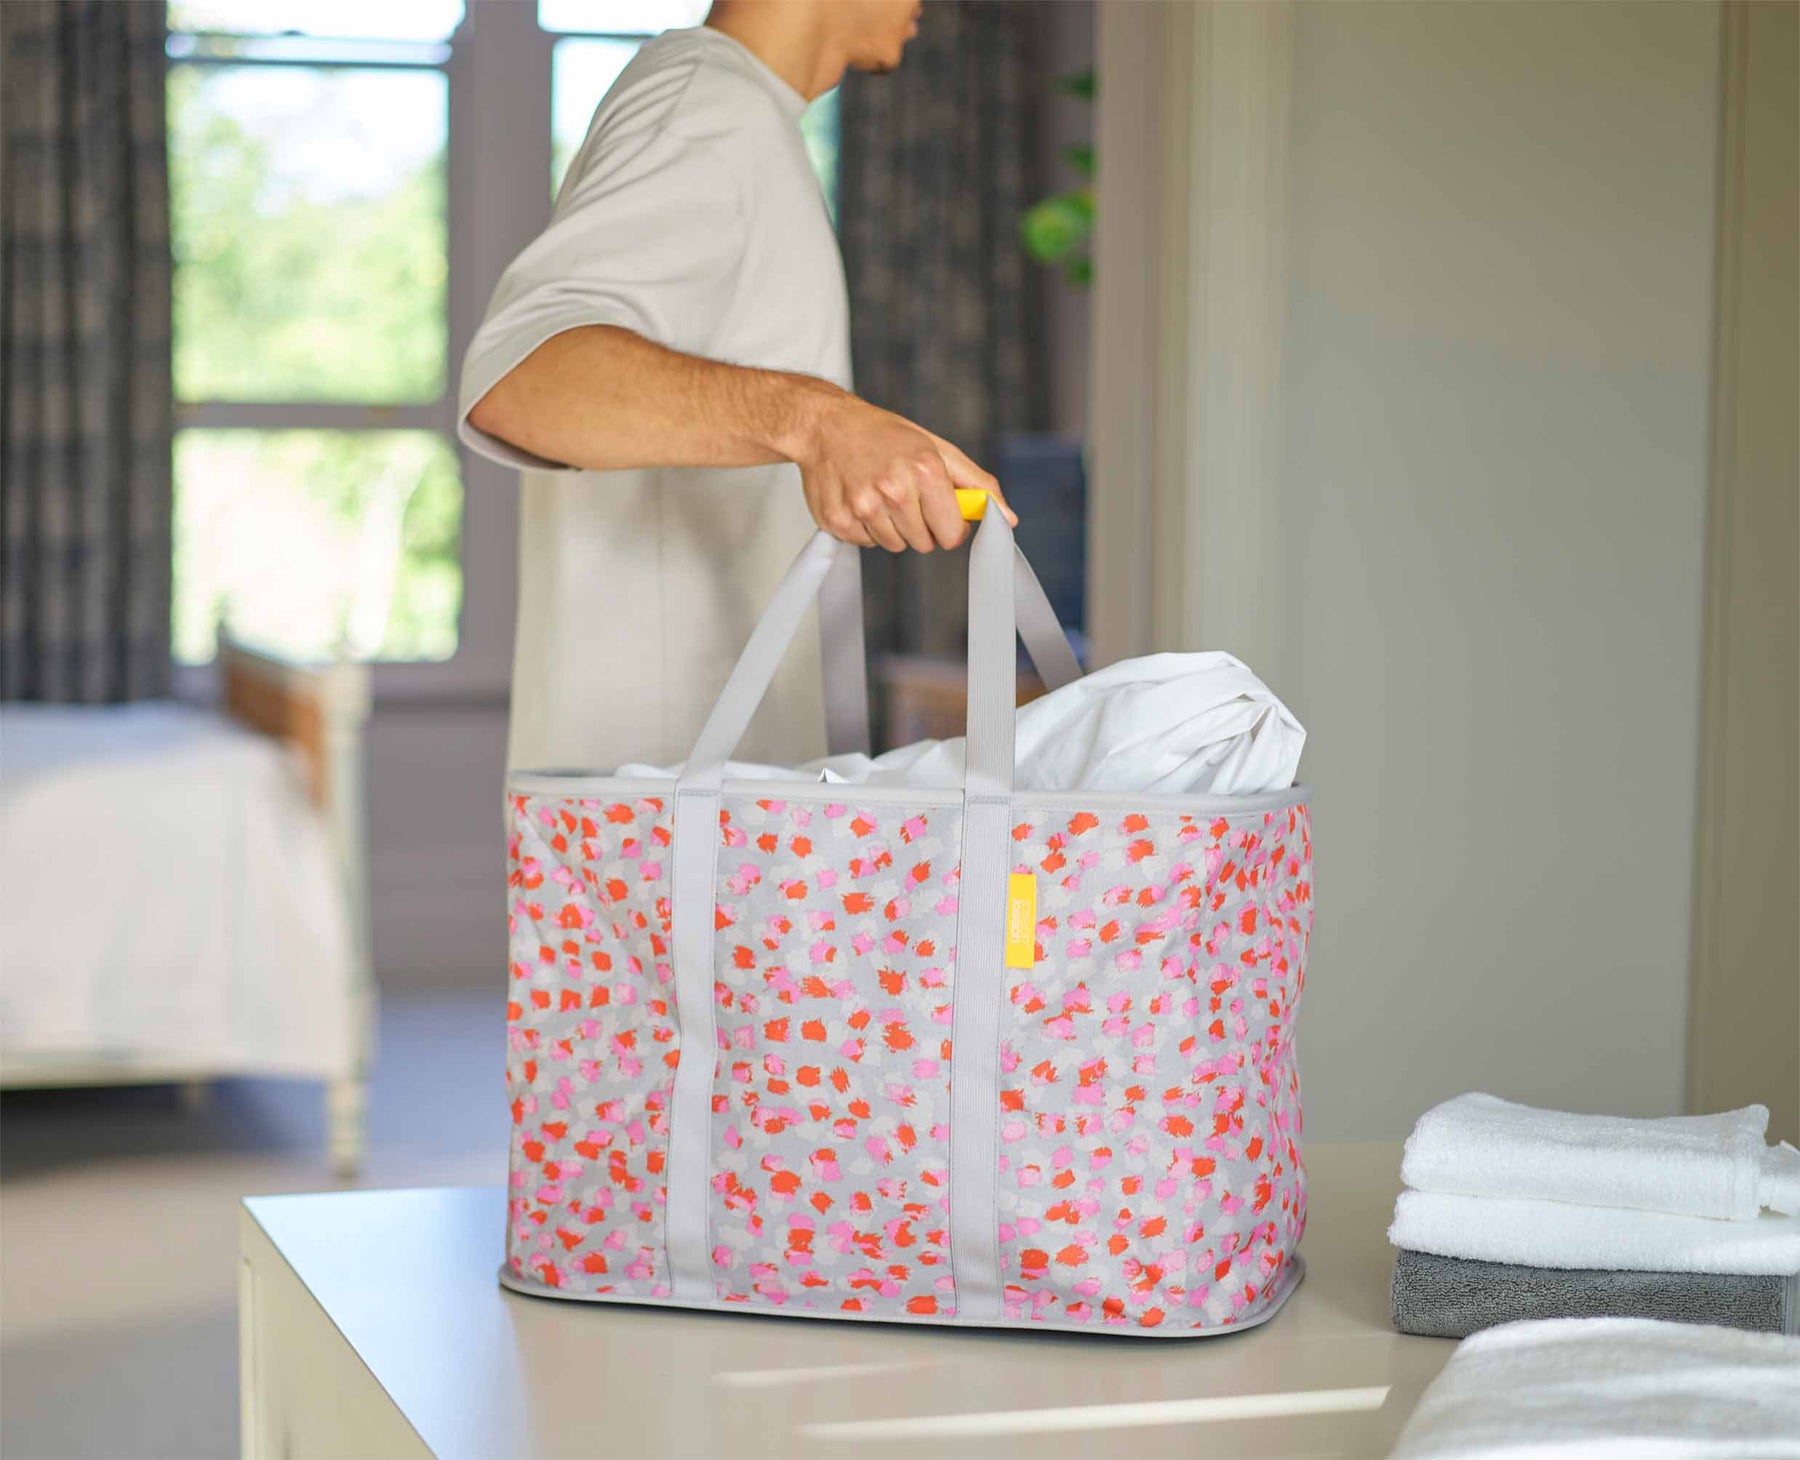 Hold-All™ Max Collapsible 55L Laundry Basket - 50040 - Image 3